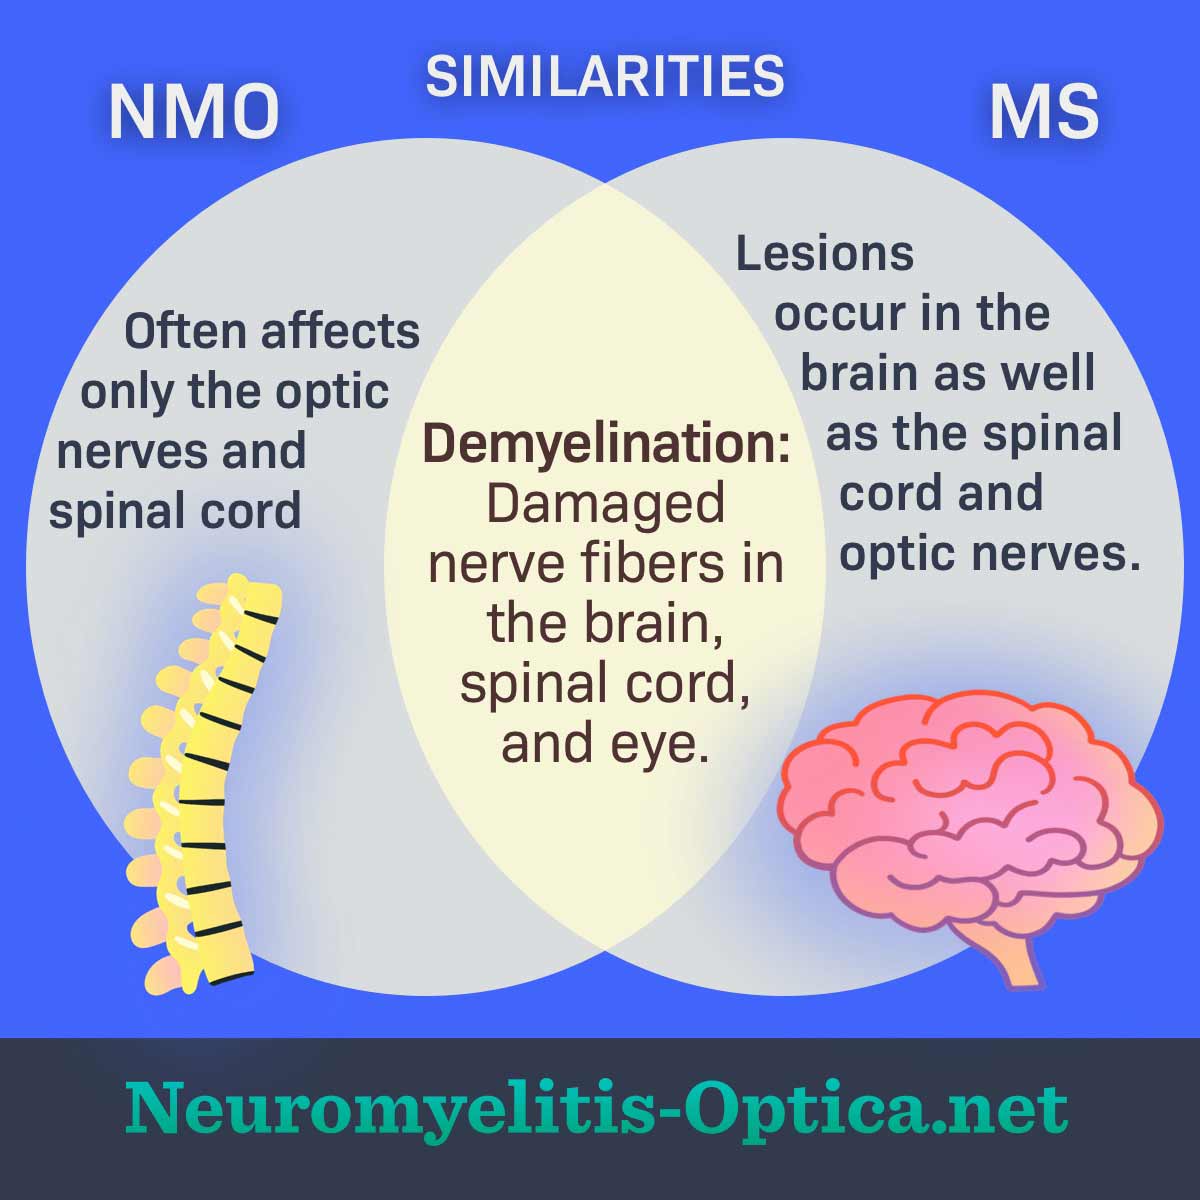 A chart breaking down the differences between NMO and MS side by side